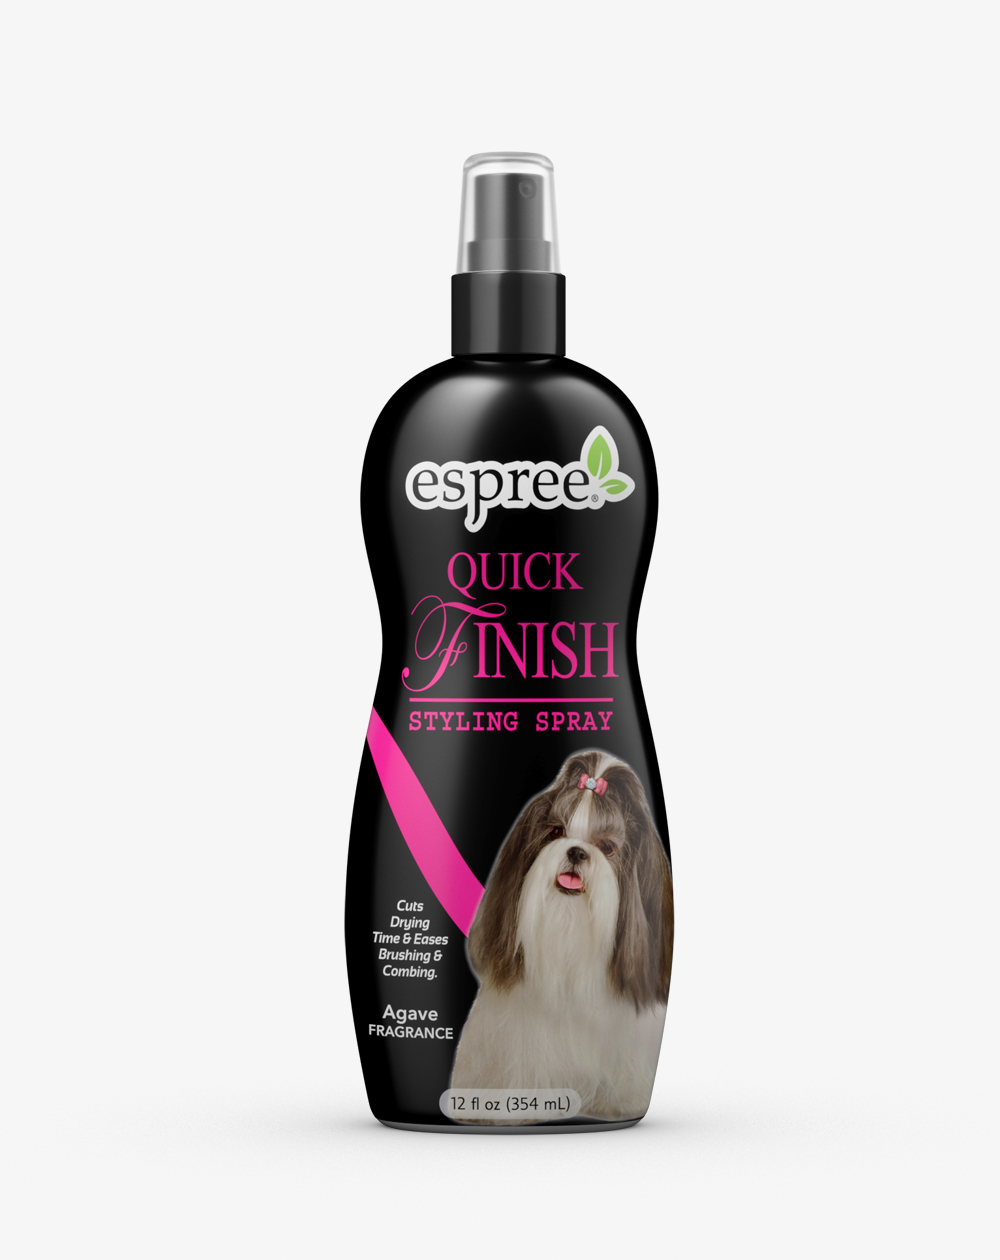 Espree Quick Finish Styling Spray for Dogs